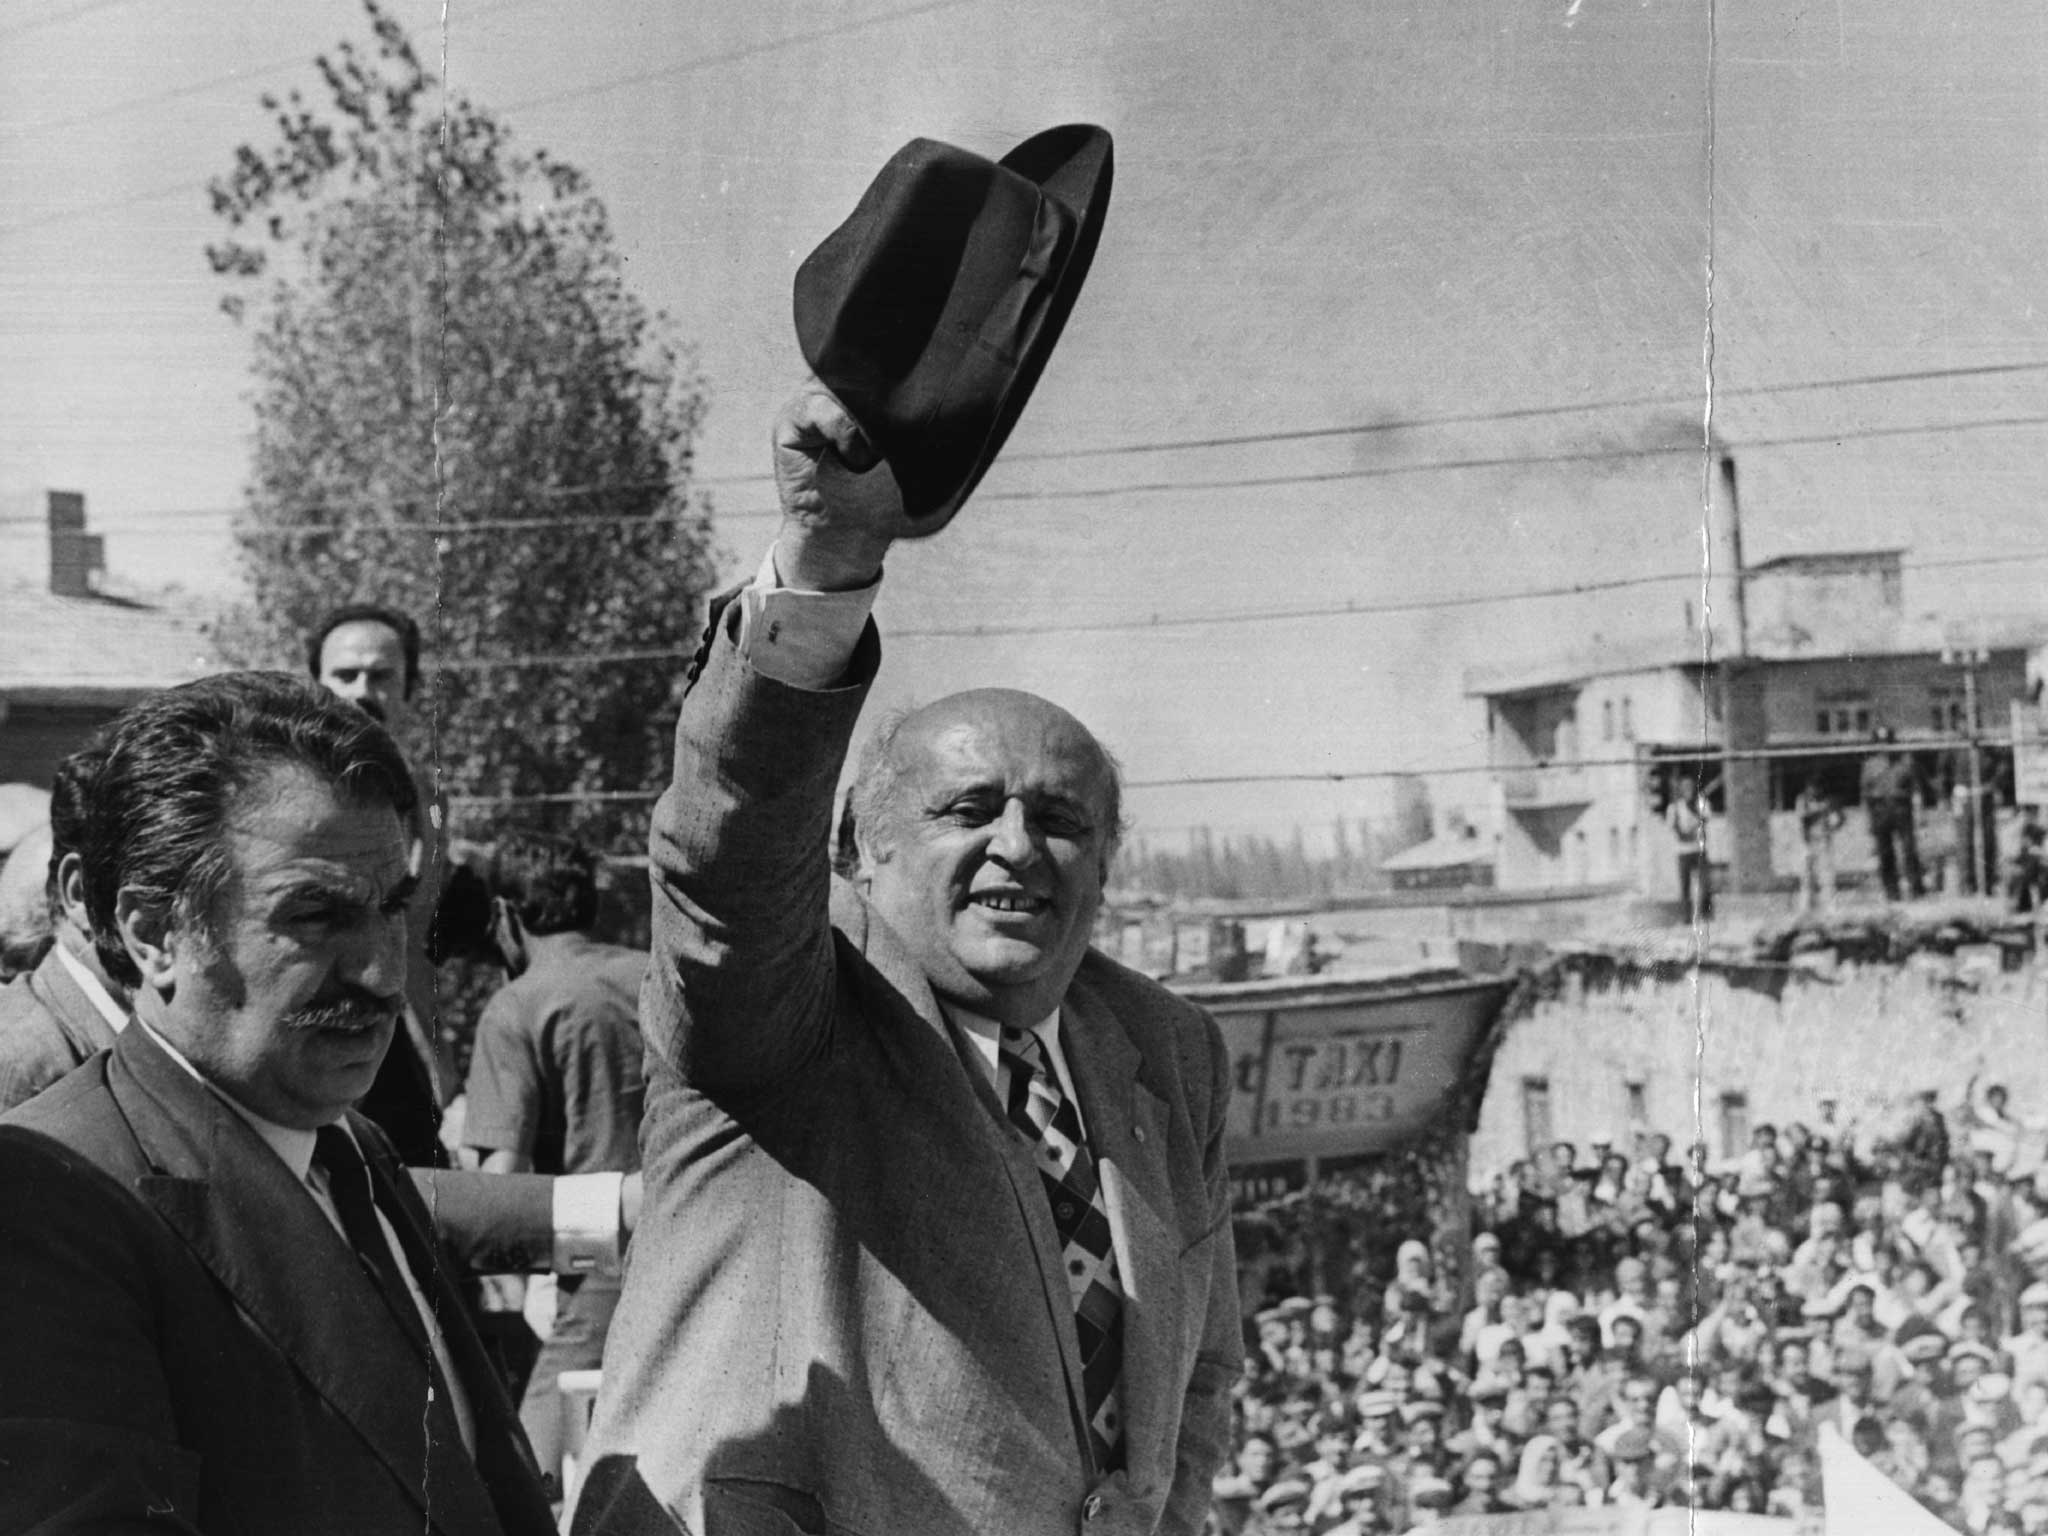 Suleyman Demirel photographed during his election tour in 1979